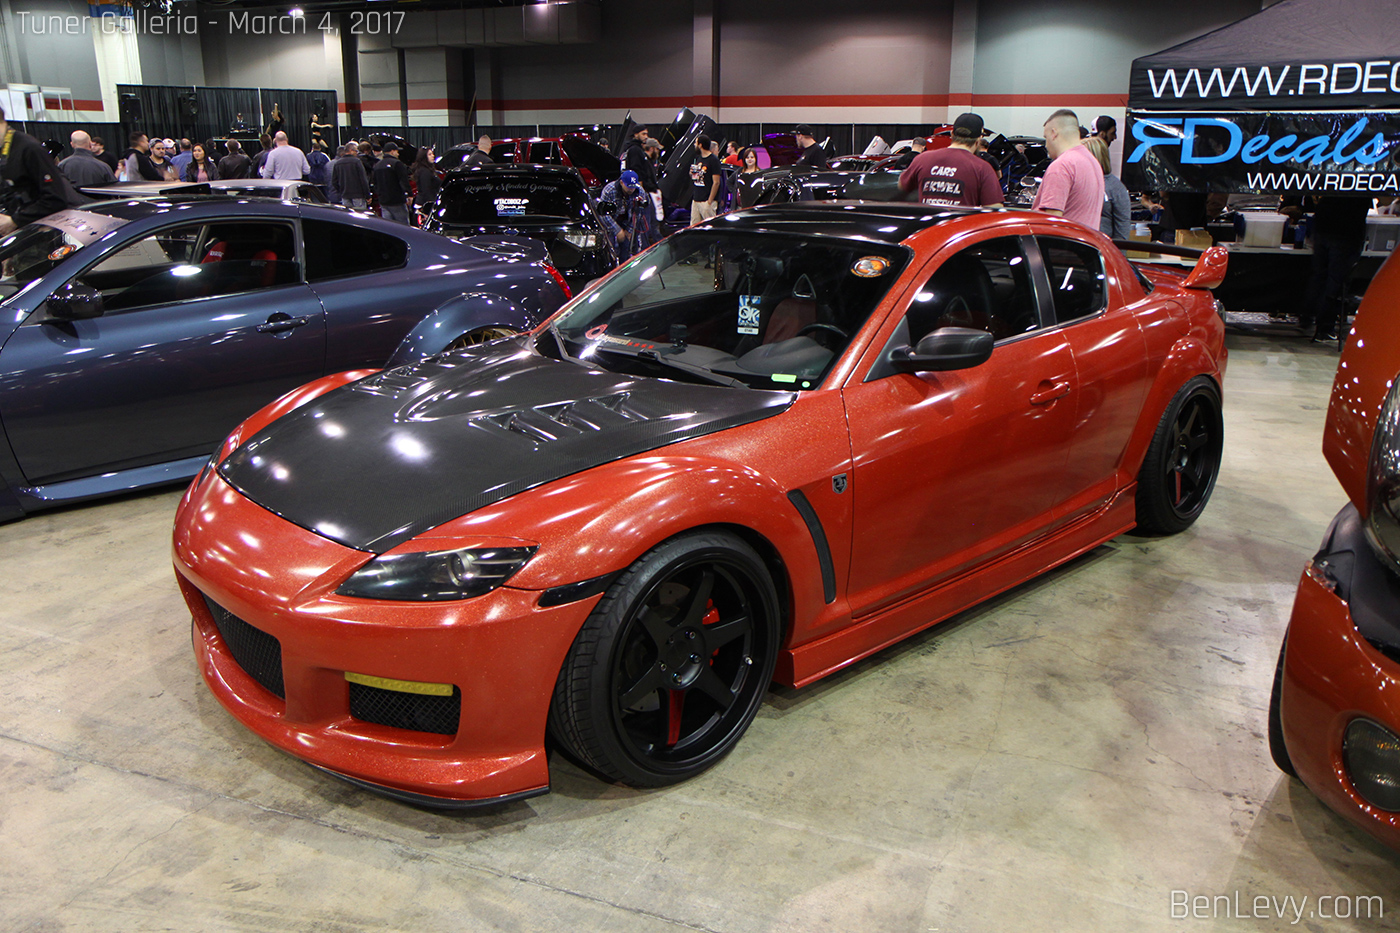 Wrapped Mazda RX-8 at Tuner Galleria